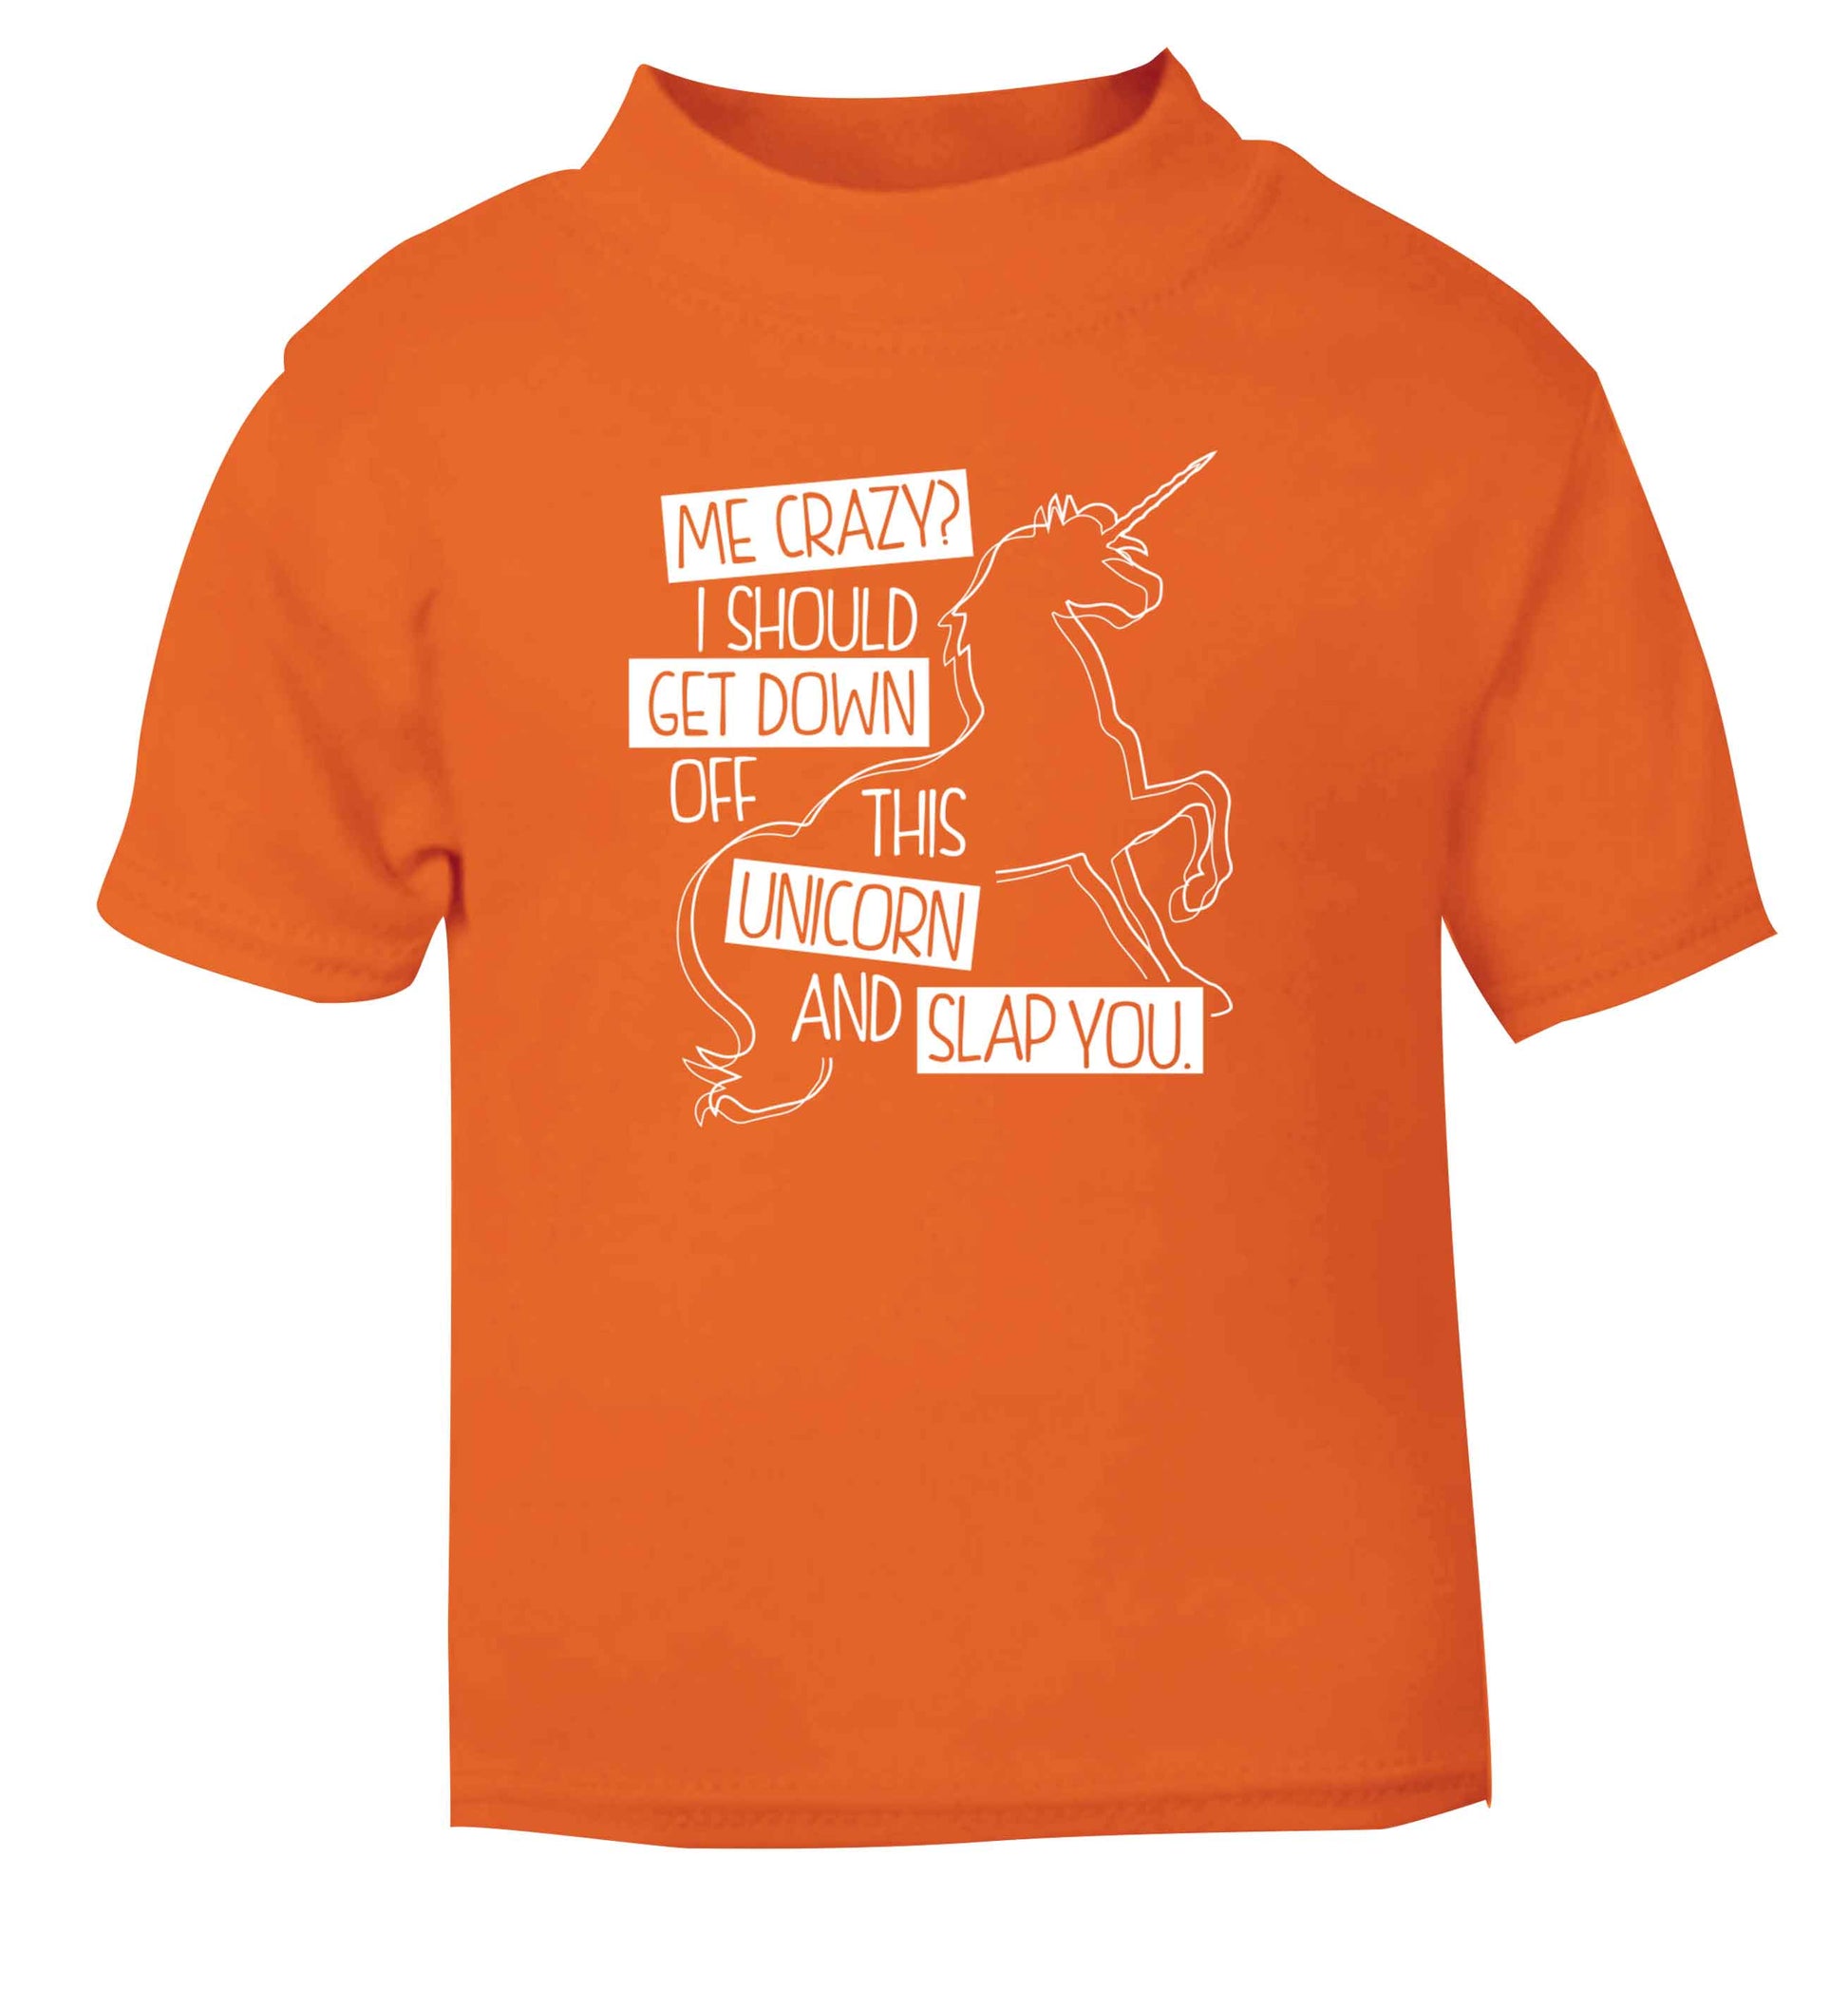 Me crazy? I should get down off this unicorn and slap you orange Baby Toddler Tshirt 2 Years